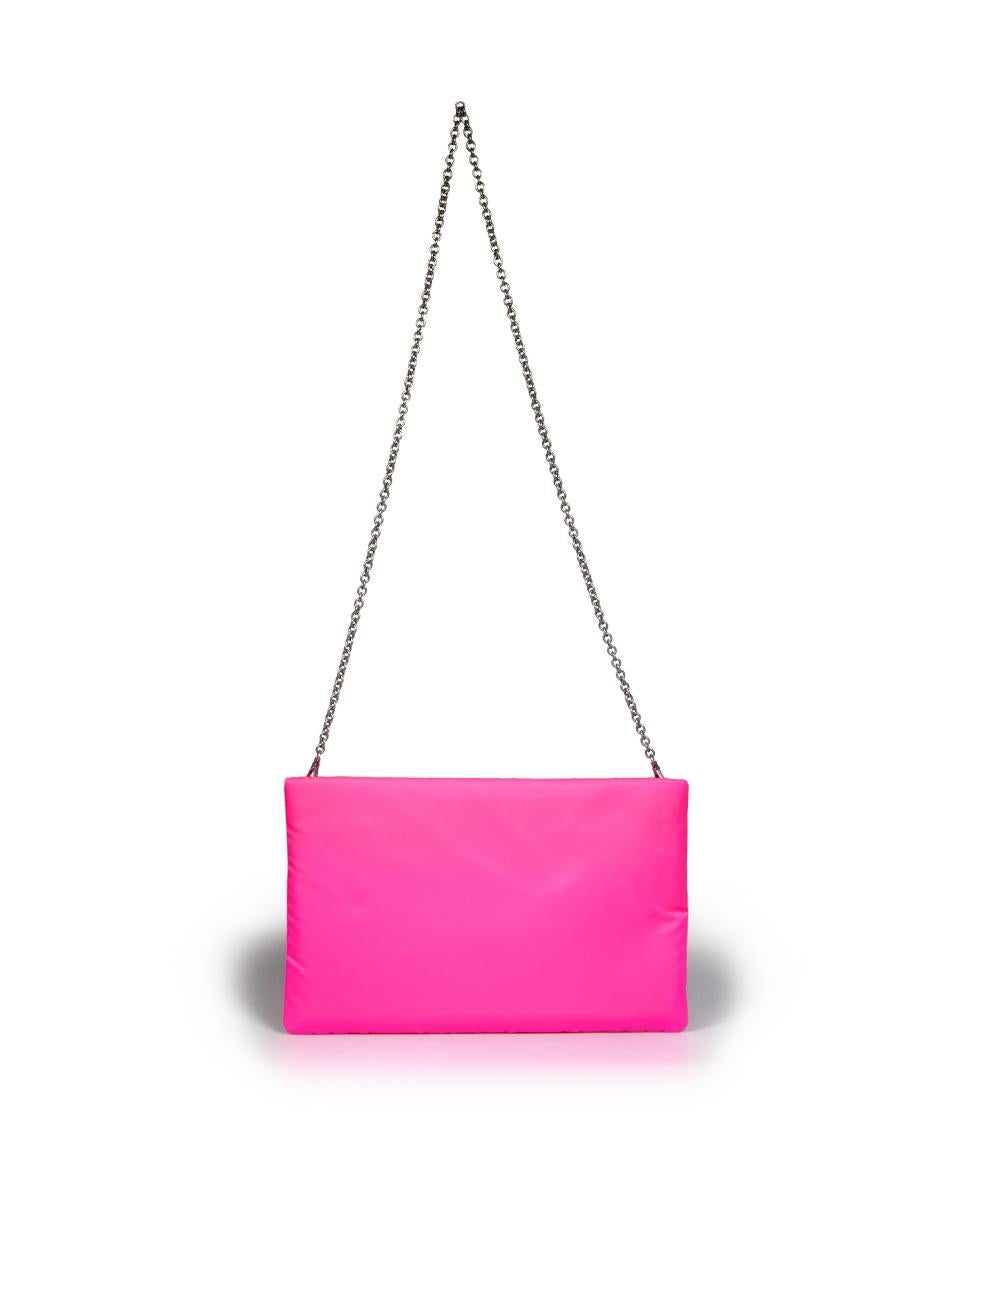 Prada Neon Pink Padded Clutch with Chain In Excellent Condition For Sale In London, GB